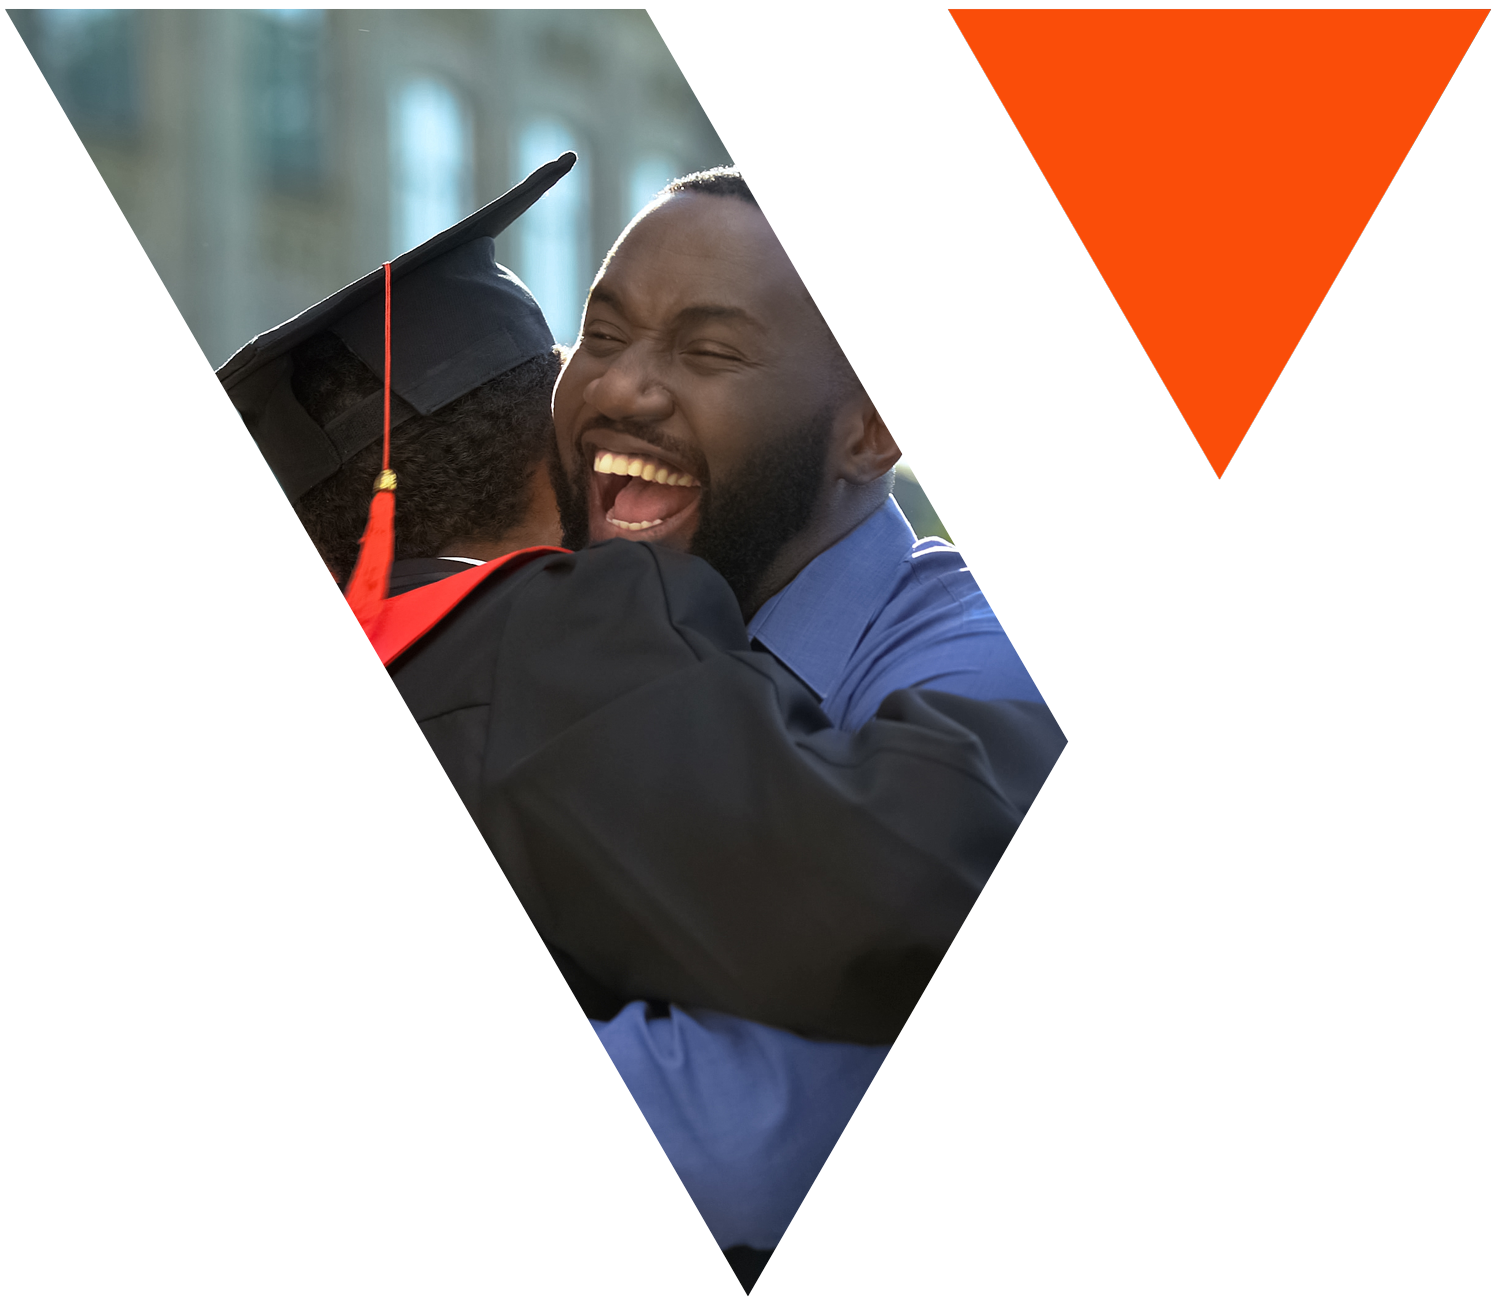 Two people, one in a cap and gown, embrace in image shaped like the Vision Financial Group logo